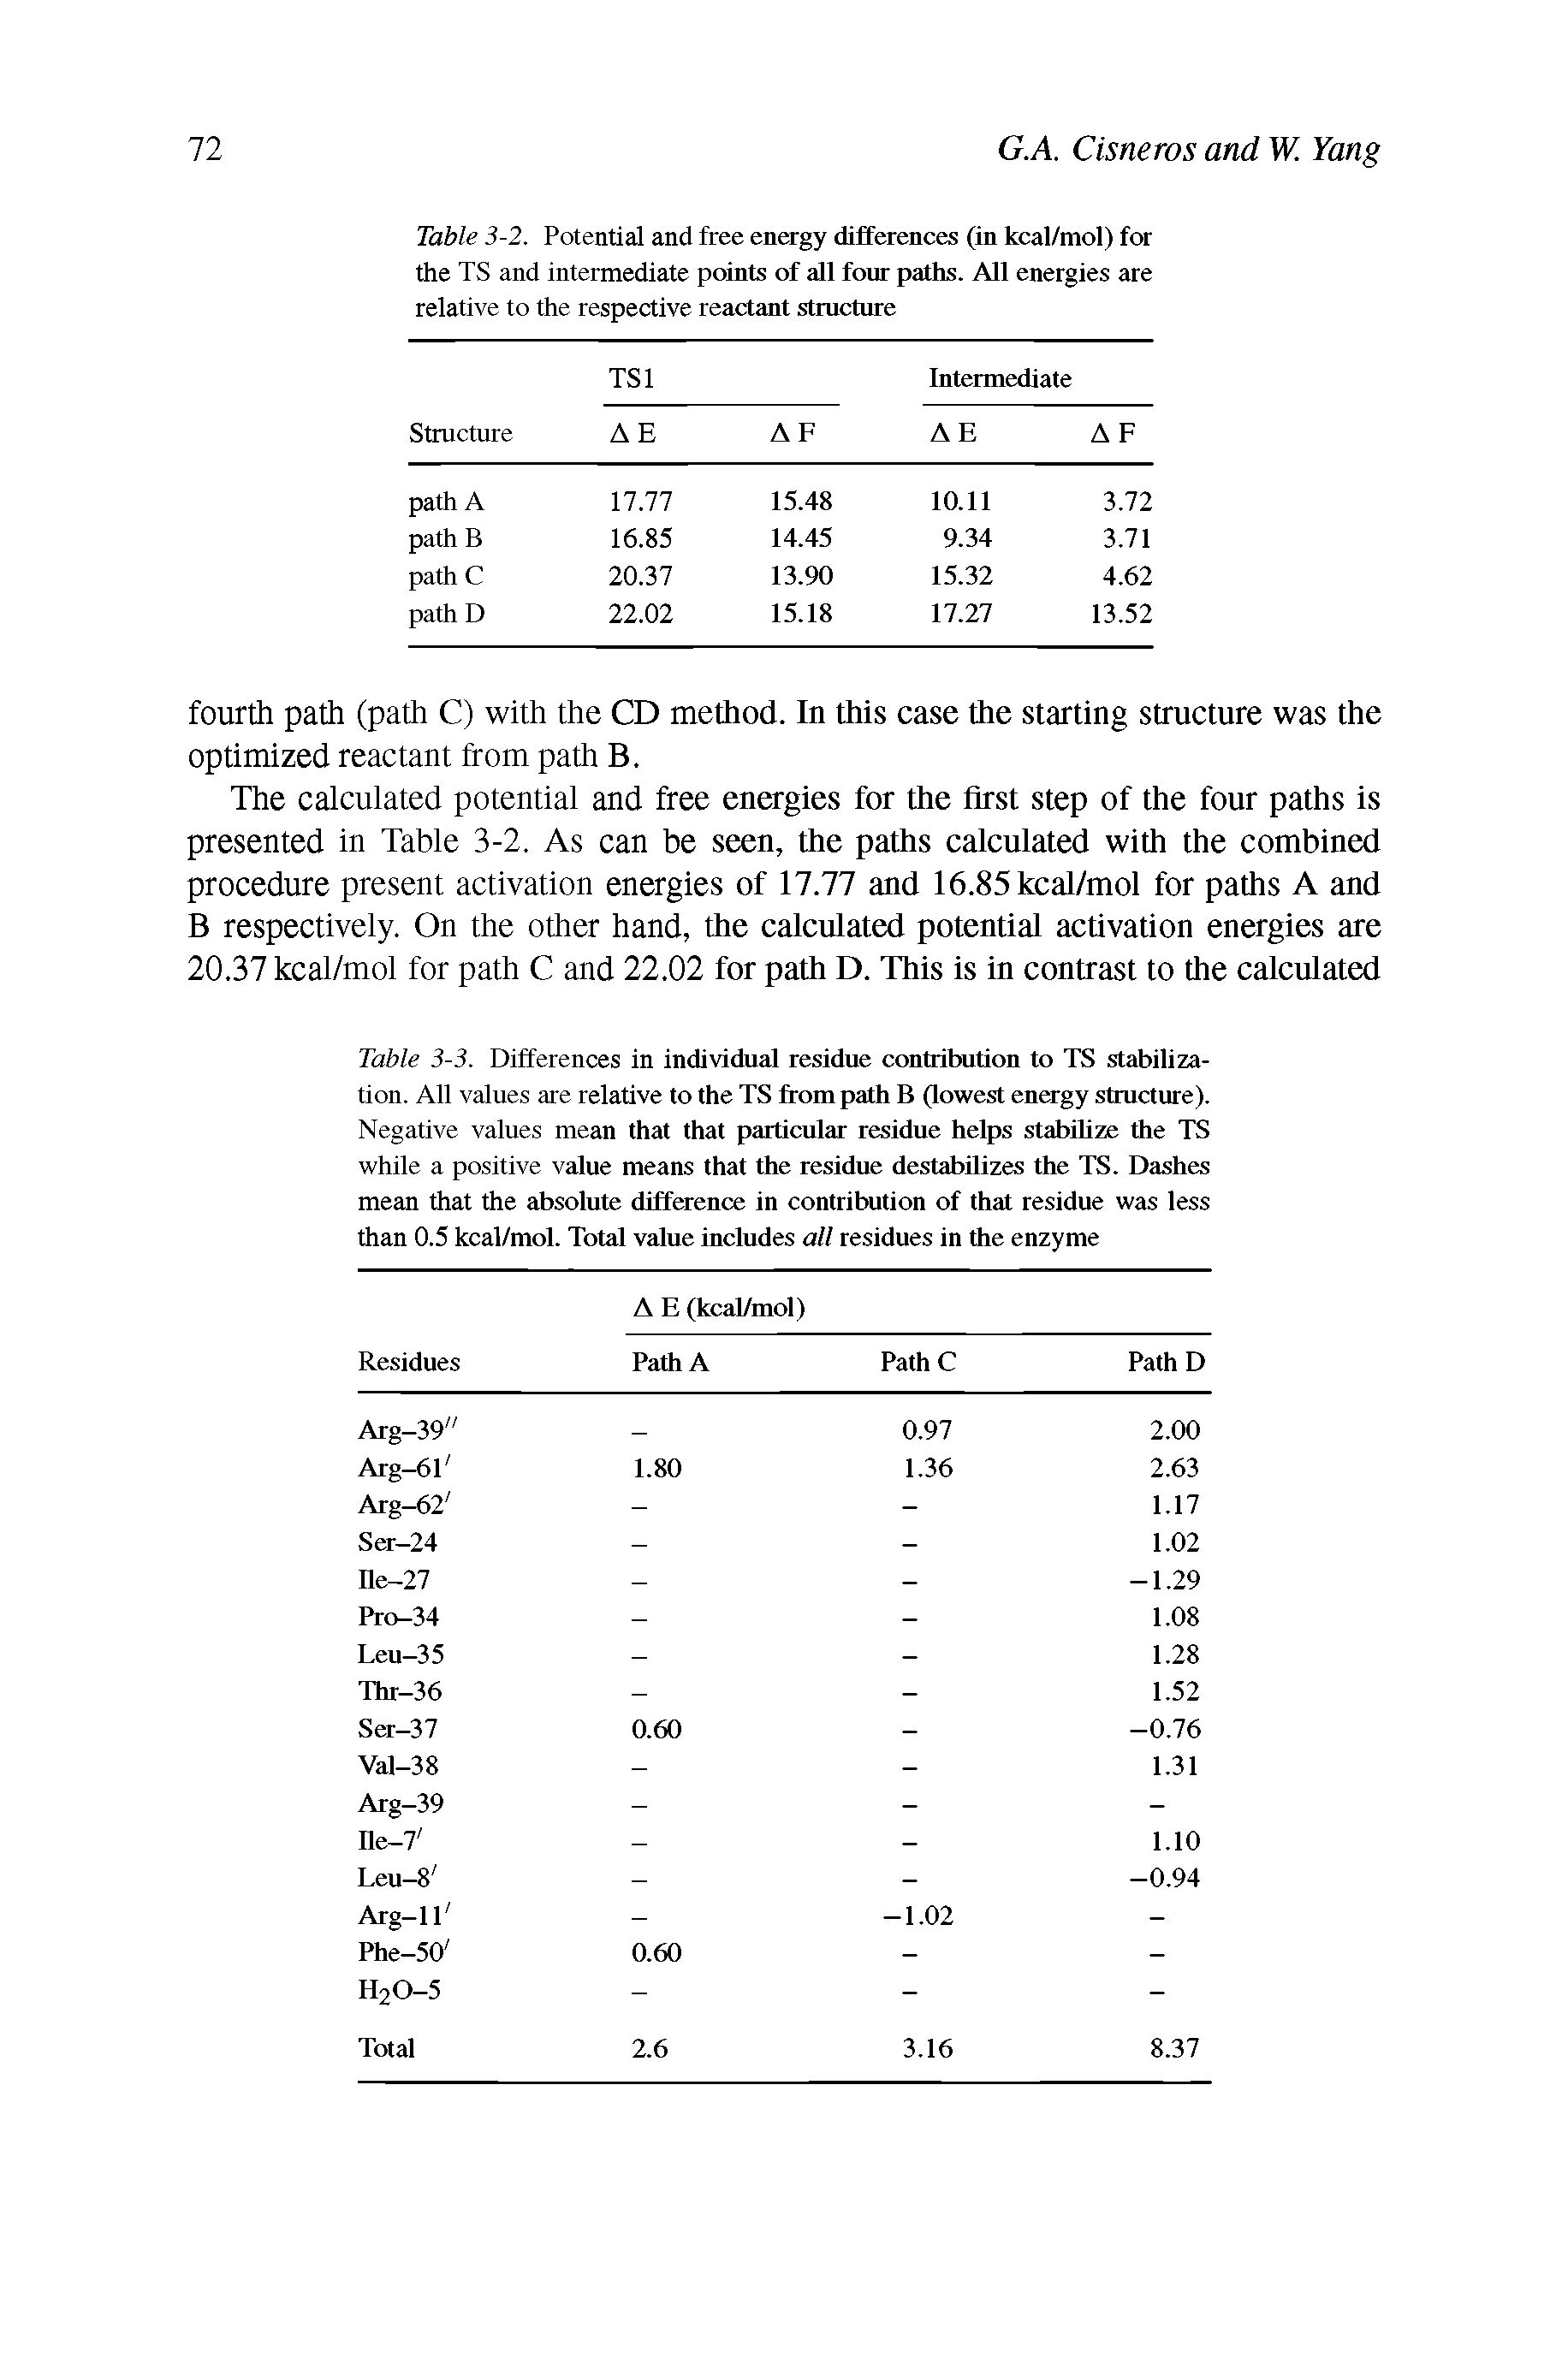 Table 3-3. Differences in individual residue contribution to TS stabilization. All values are relative to the TS from path B (lowest energy structure). Negative values mean that that particular residue helps stabilize die TS while a positive value means that the residue destabilizes the TS. Dashes mean that the absolute difference in contribution of that residue was less than 0.5 kcal/mol. Total value includes all residues in the enzyme...